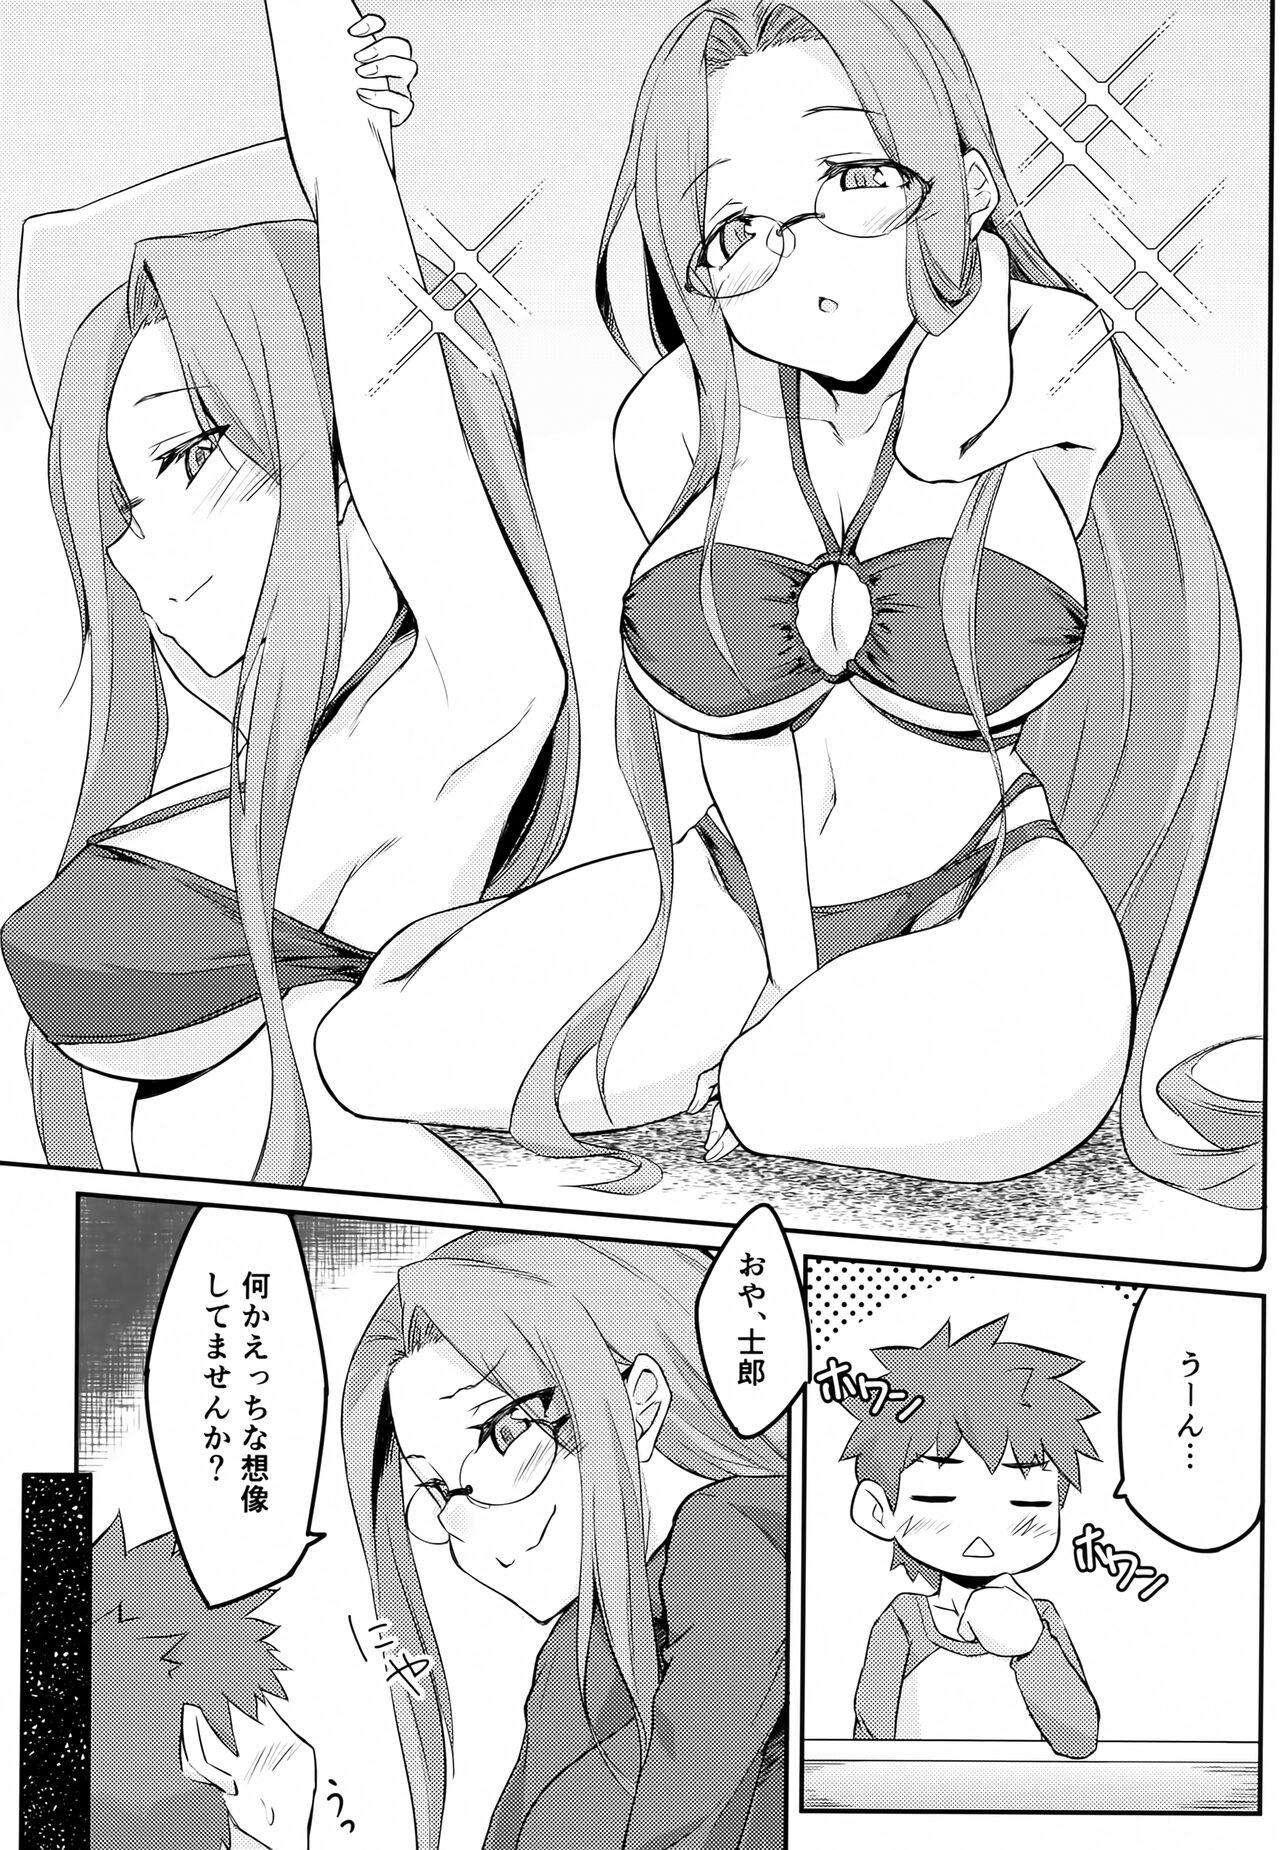 Female R15 - Fate stay night Asia - Page 6